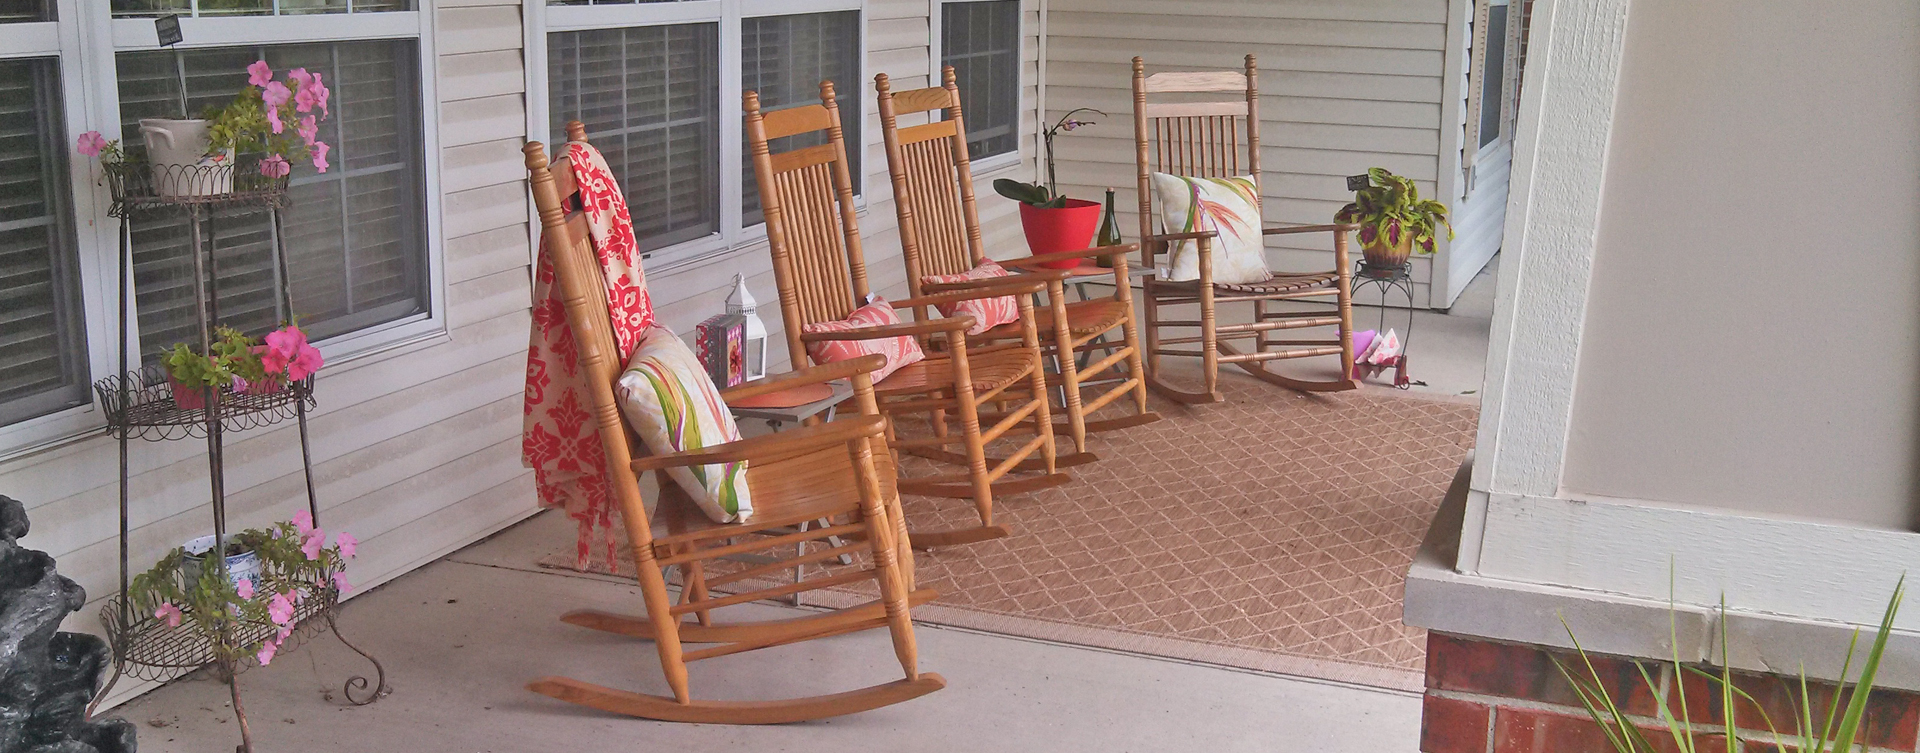 Enjoy conversations with friends on the porch at Bickford of Fort Dodge